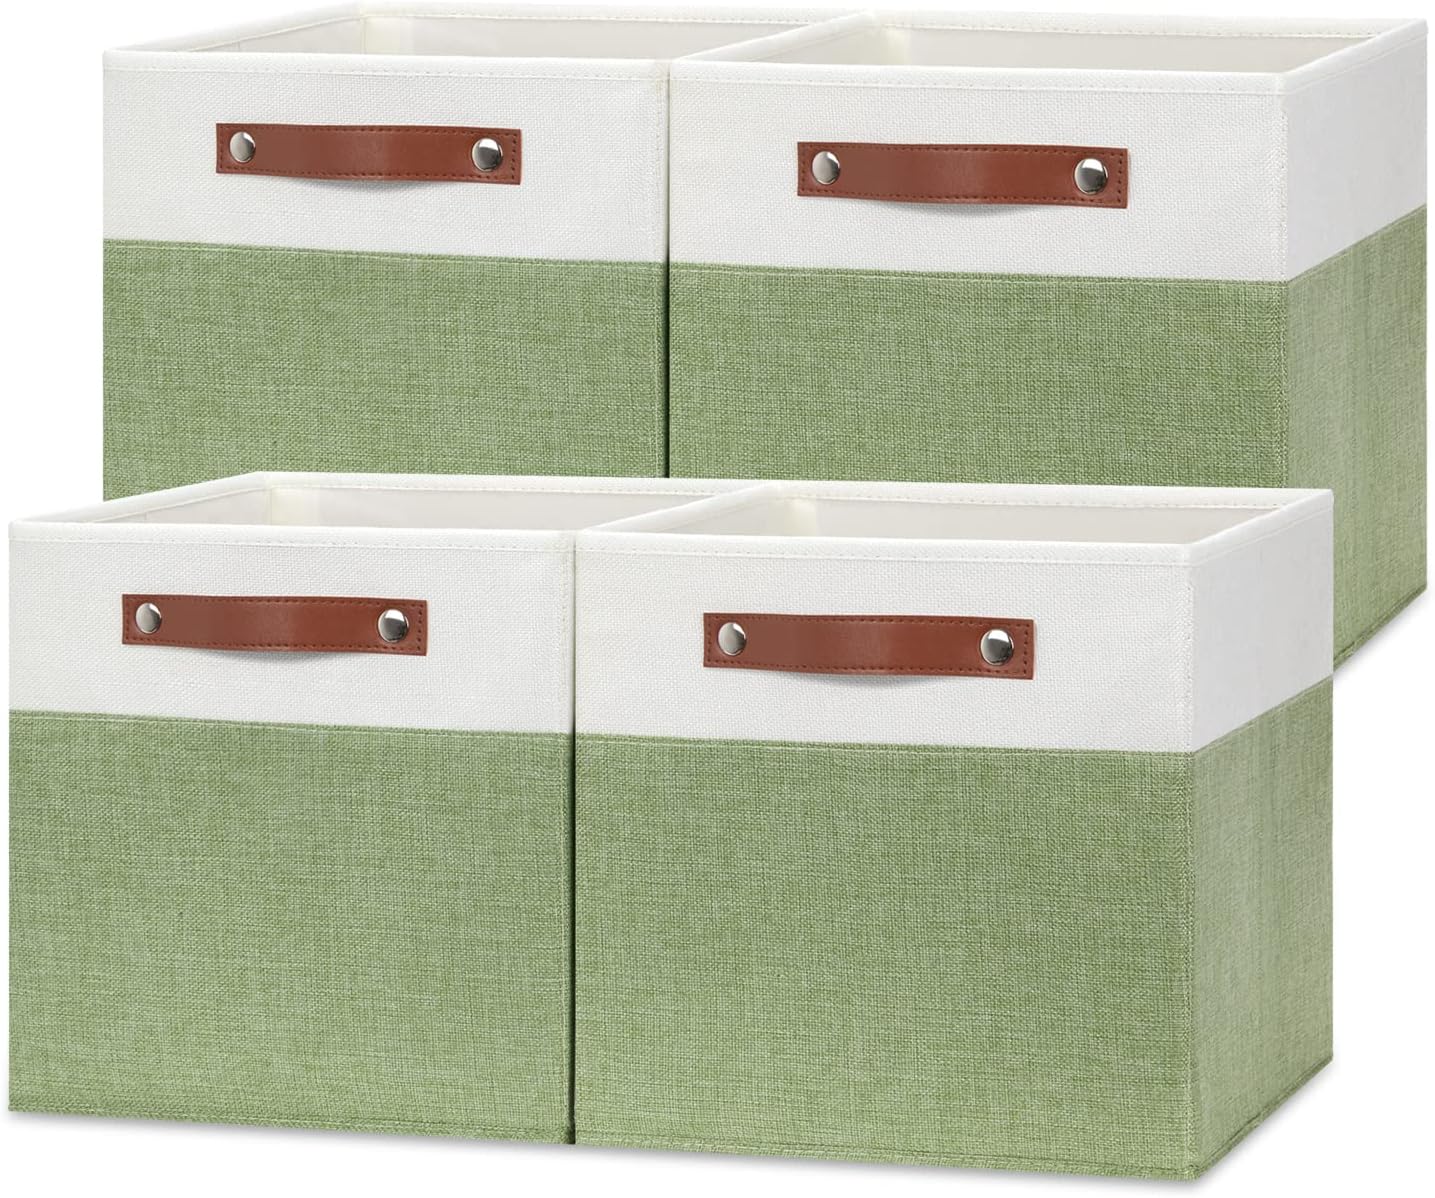 Temary 12 Inch Fabric Storage Cubes Storage Bins with Leather Handles, 4 Pack Cube Baskets Bins for Organizing Closet, Foldable Cloth Baskets for Shelves (White&Green)